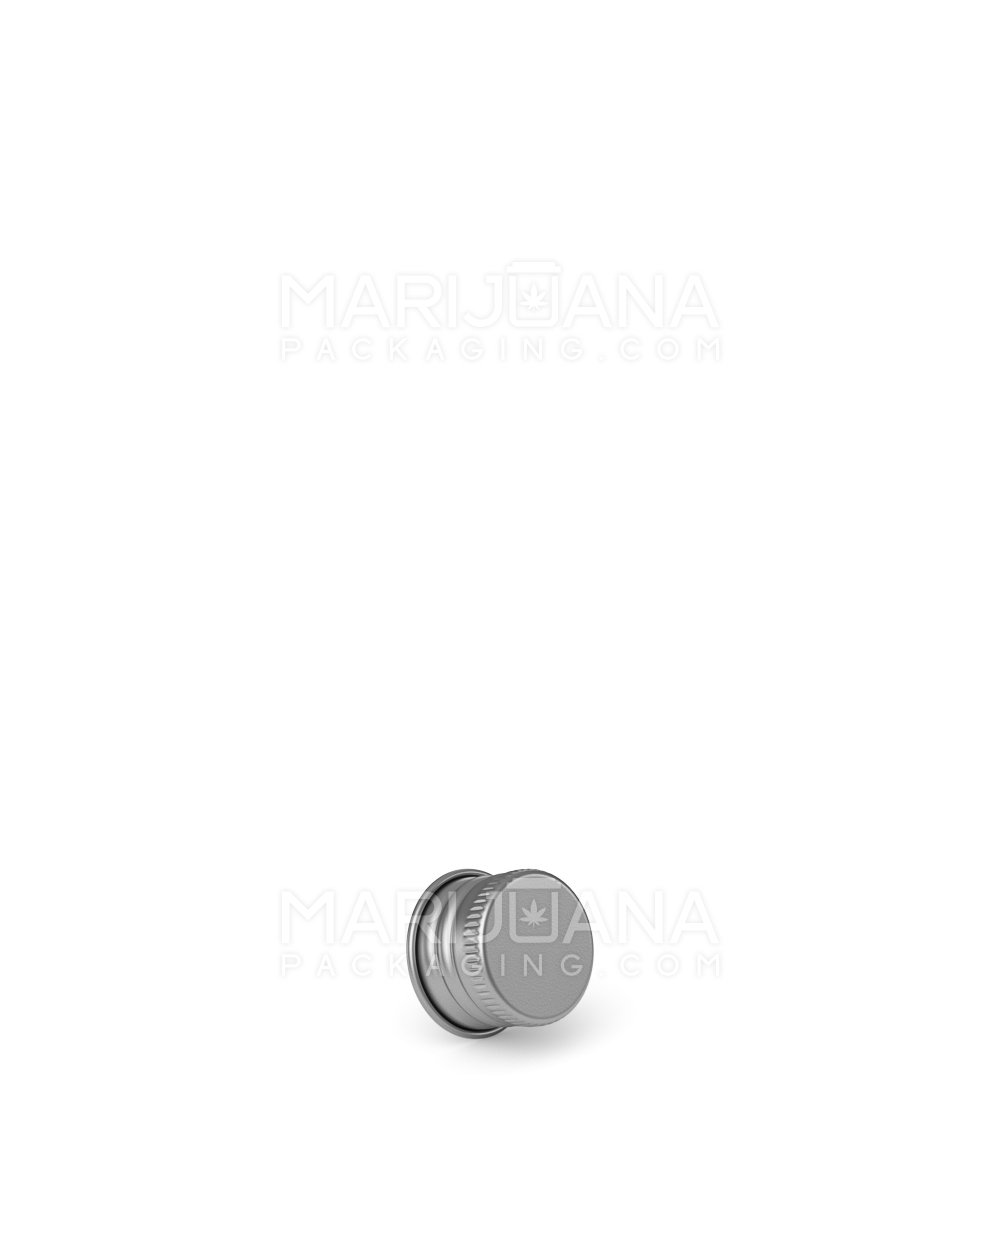 Ribbed Screw Top Metal Caps w/ Foam Liner | 18mm - Glossy Silver - 400 Count - 1